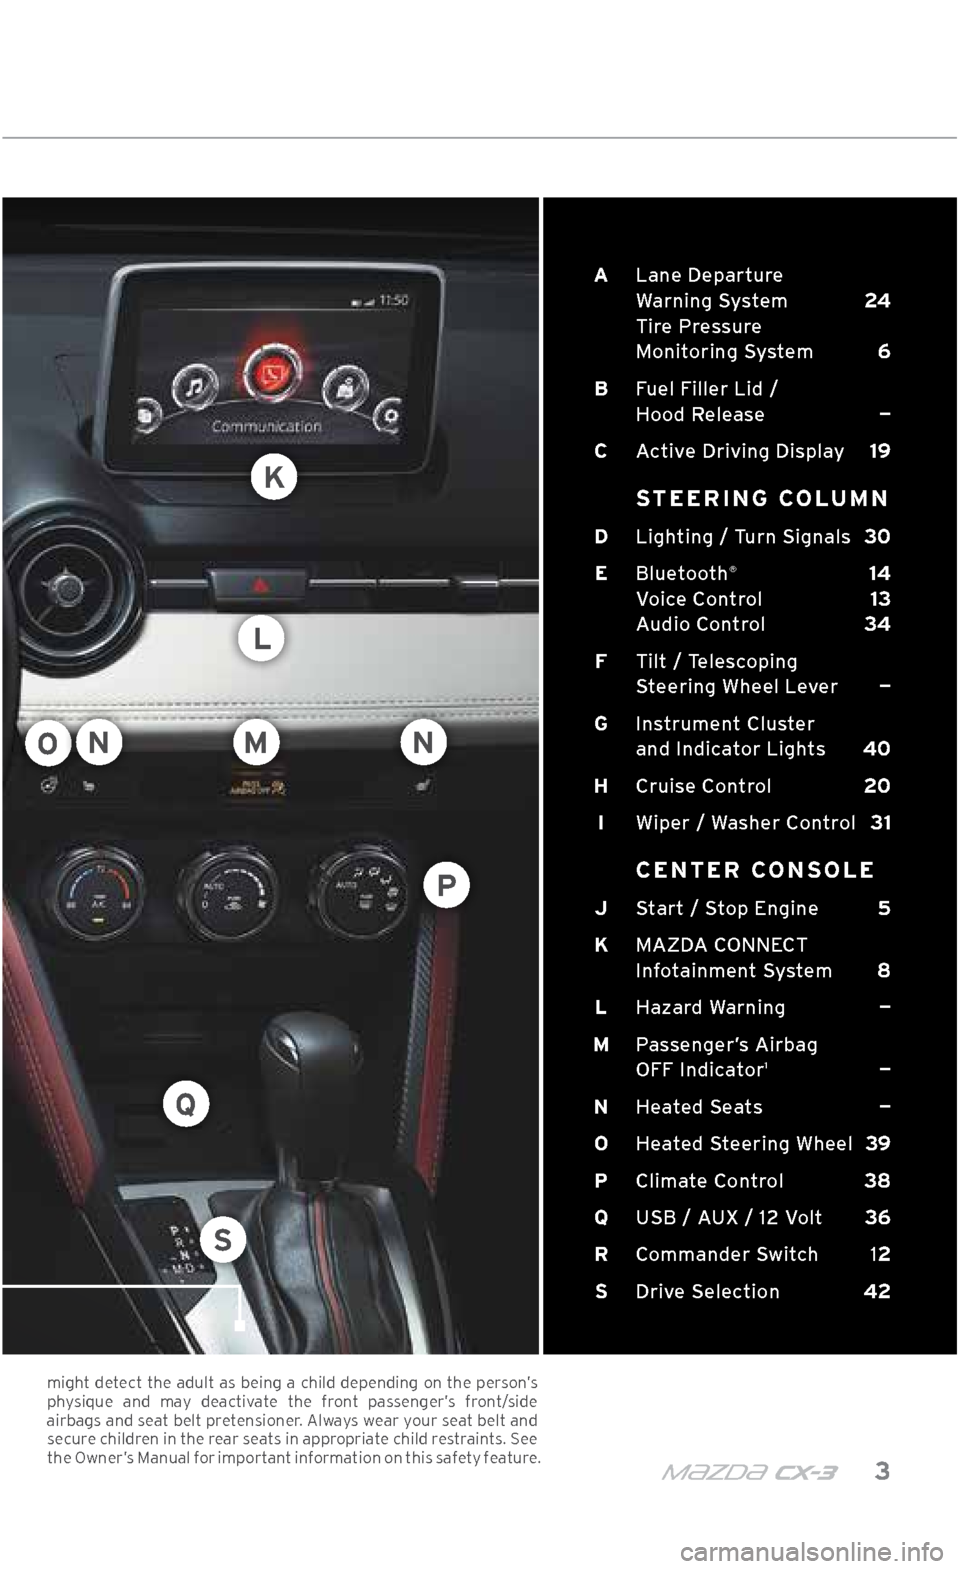 MAZDA MODEL CX-3 2018  Smart Start Guide (in English) m{zd{ c x-3    3
 A   Lane Departure   
Warning System   24 
Tire Pressure   
Monitoring System  6
  B   Fuel Filler Lid /   
Hood Release  —
  C  Active Driving Display  19
   STEERING COLUMN
 D  L